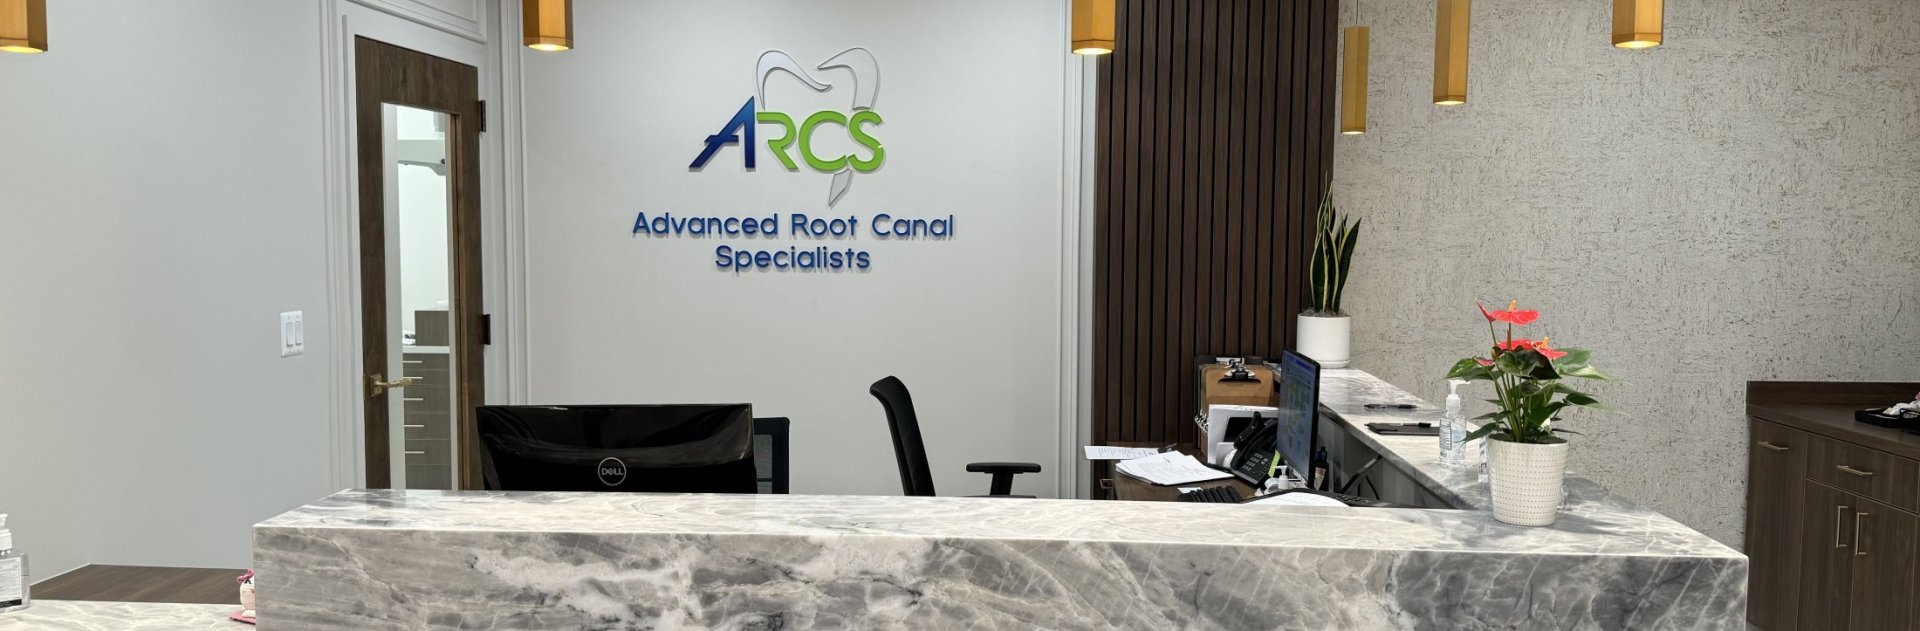 Root Canal Treatment - Advanced Endodontic Specialists